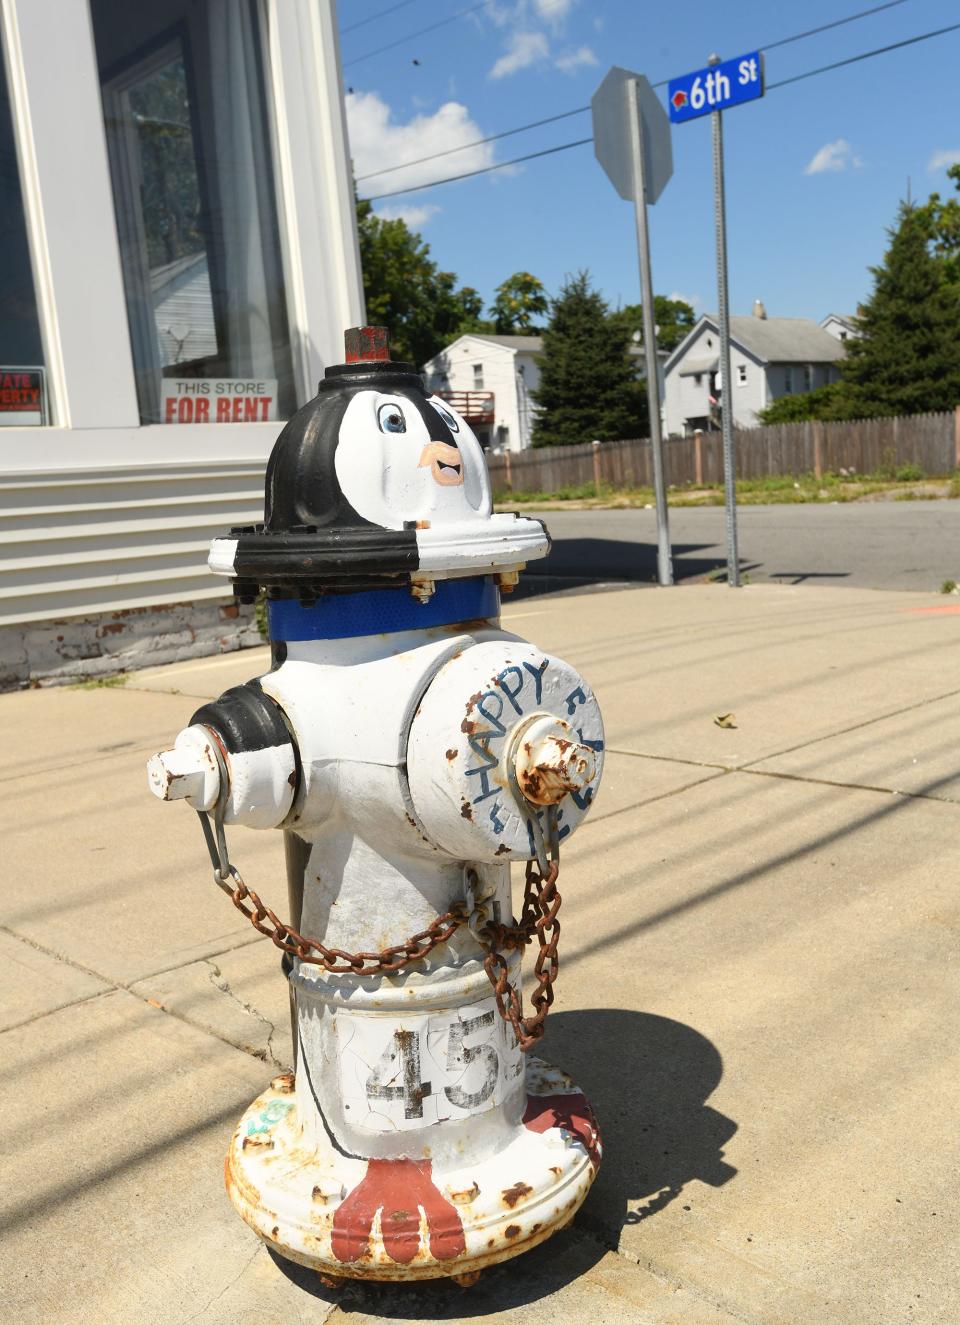 A decorated fire hydrant on North Main Street near Sixth Street in the Greeneville section of Norwich.